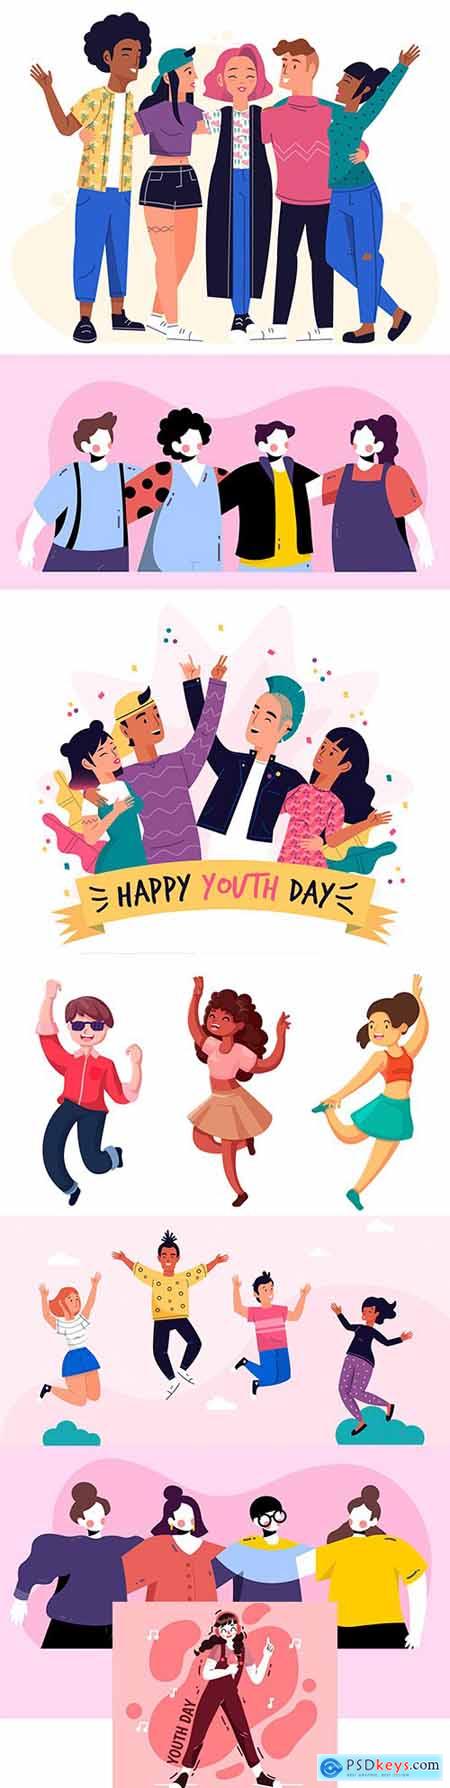 Youth Day with people hugging and jumping illustration